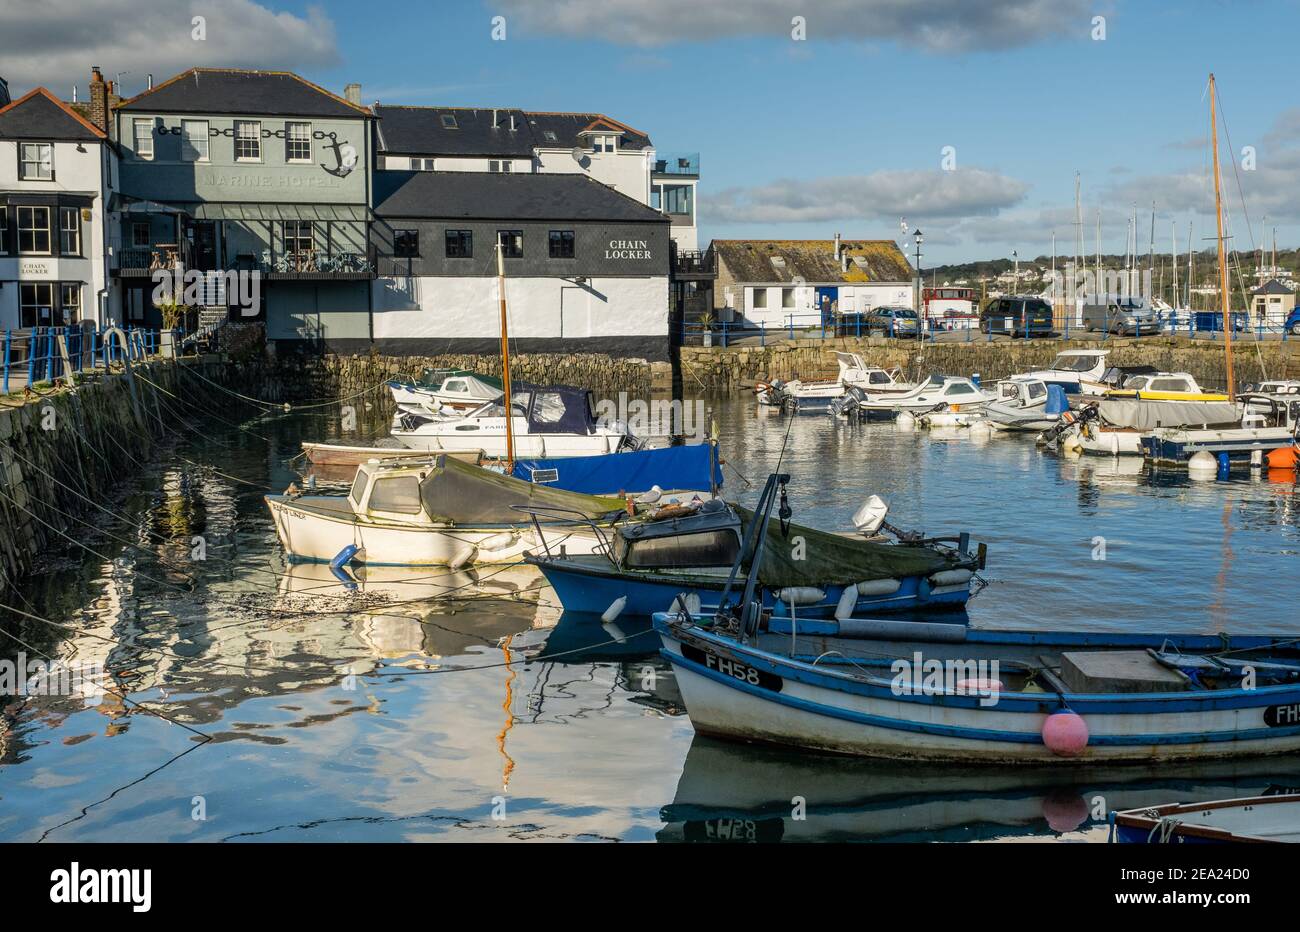 Custom House Quay and Chain Locker of Falmouth, viewed across the water and boats at high tide with reflections in the sunshine Stock Photo